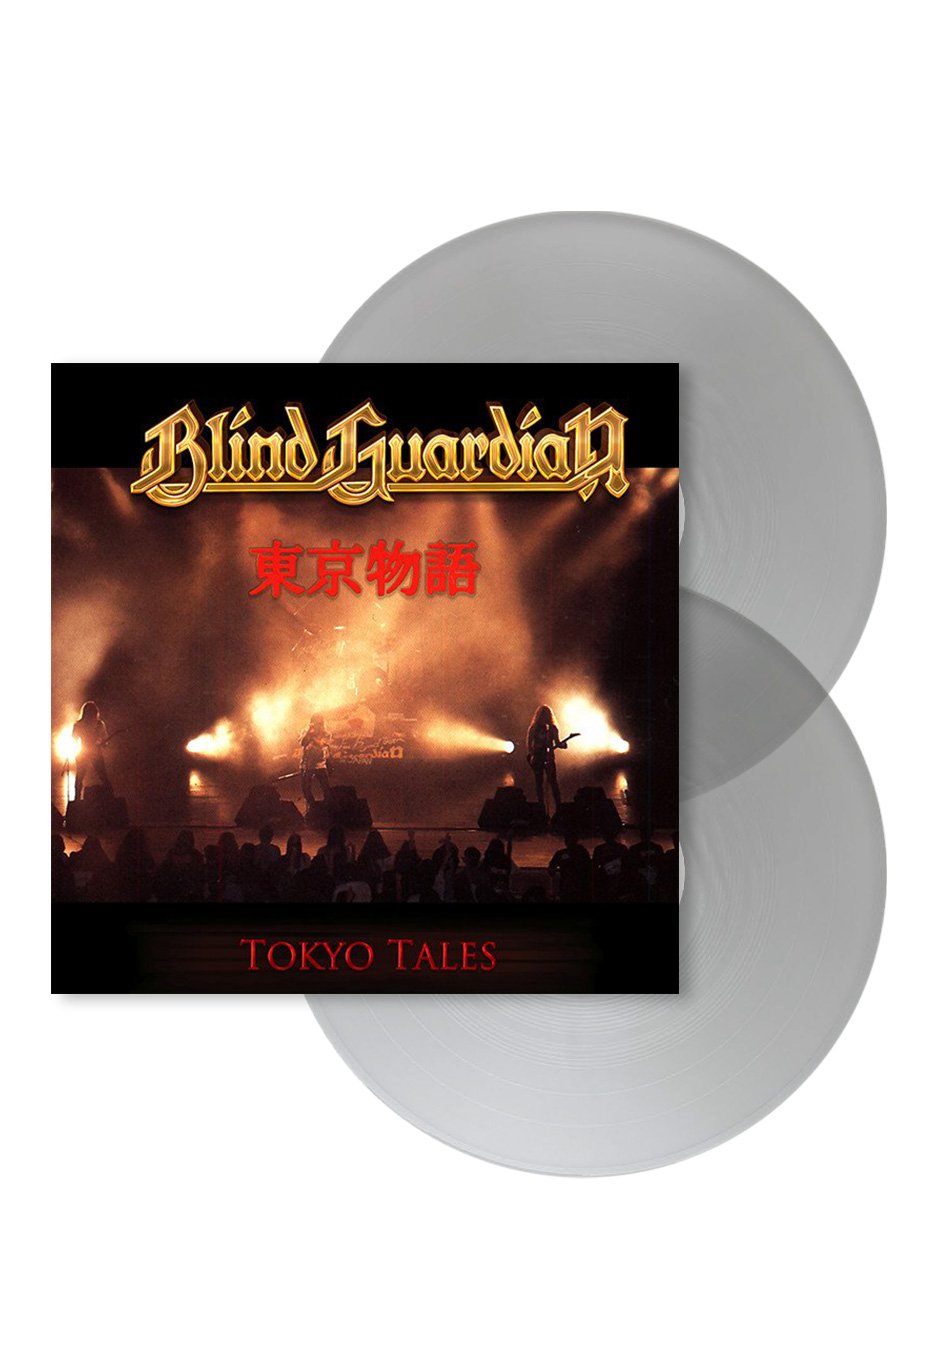 Blind Guardian - Tokyo Tales (Remastered) Clear - Colored 2 Vinyl